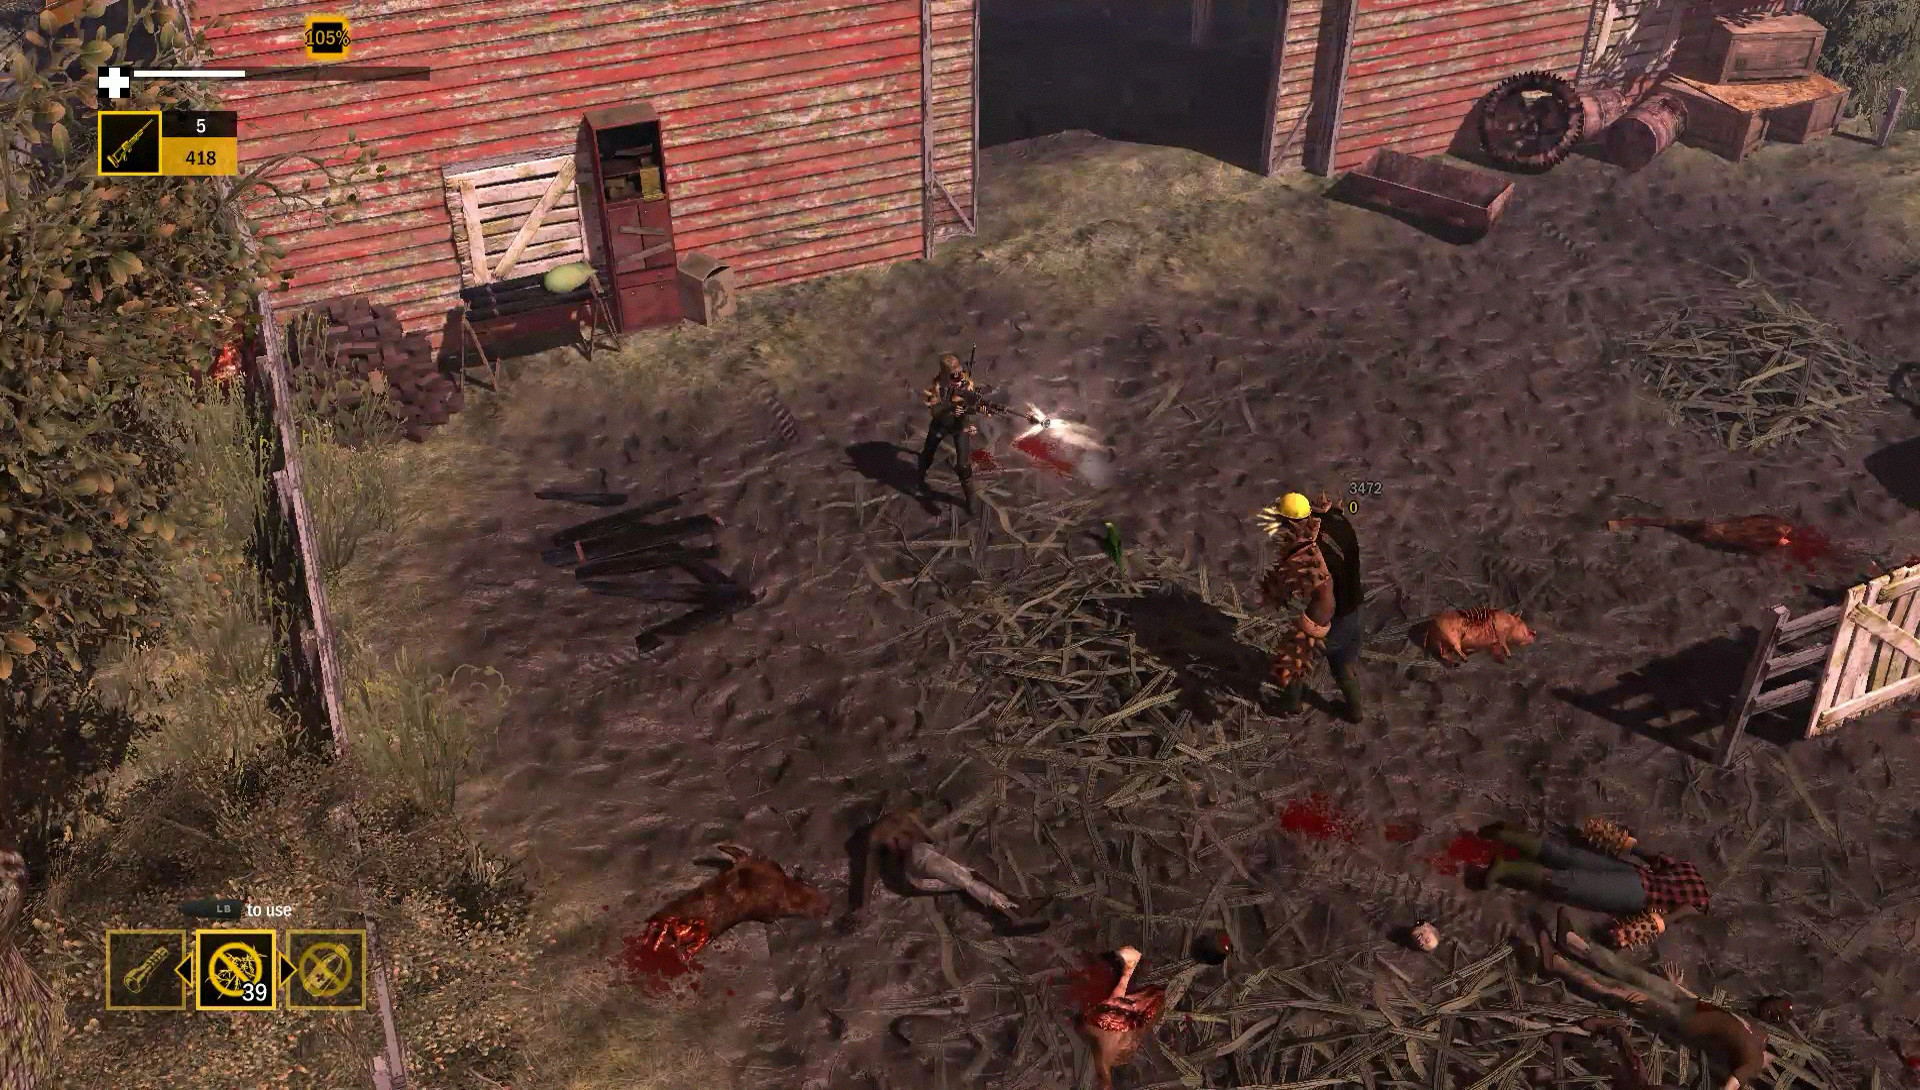 How To Survive 2 - Dead Dynamite screenshot